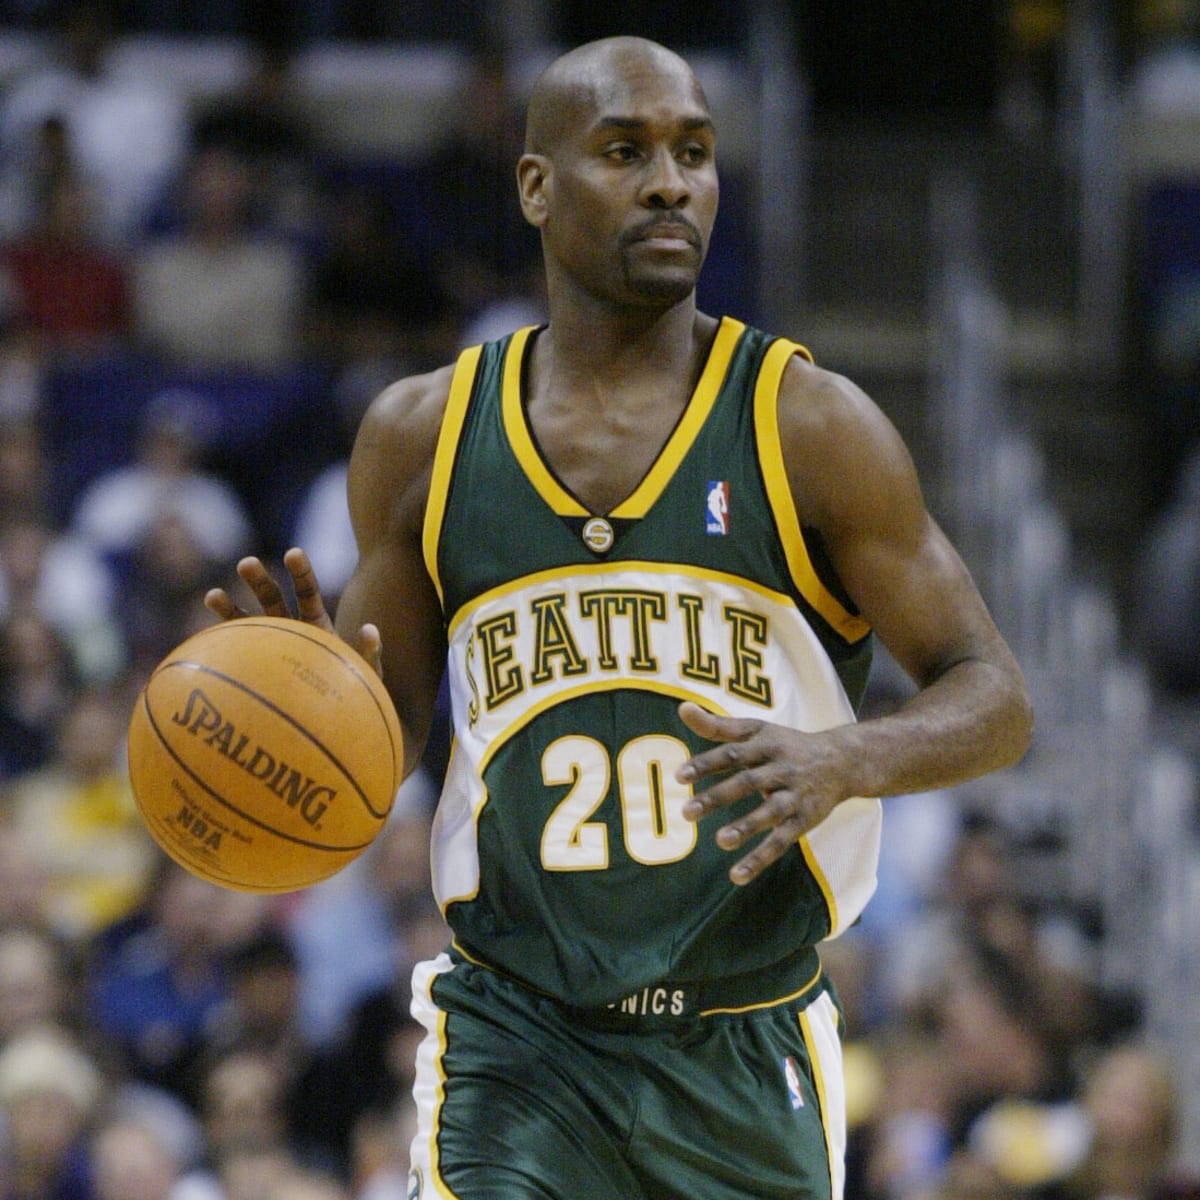 1996 Seattle SuperSonics: Where Are They Now? - Fadeaway World